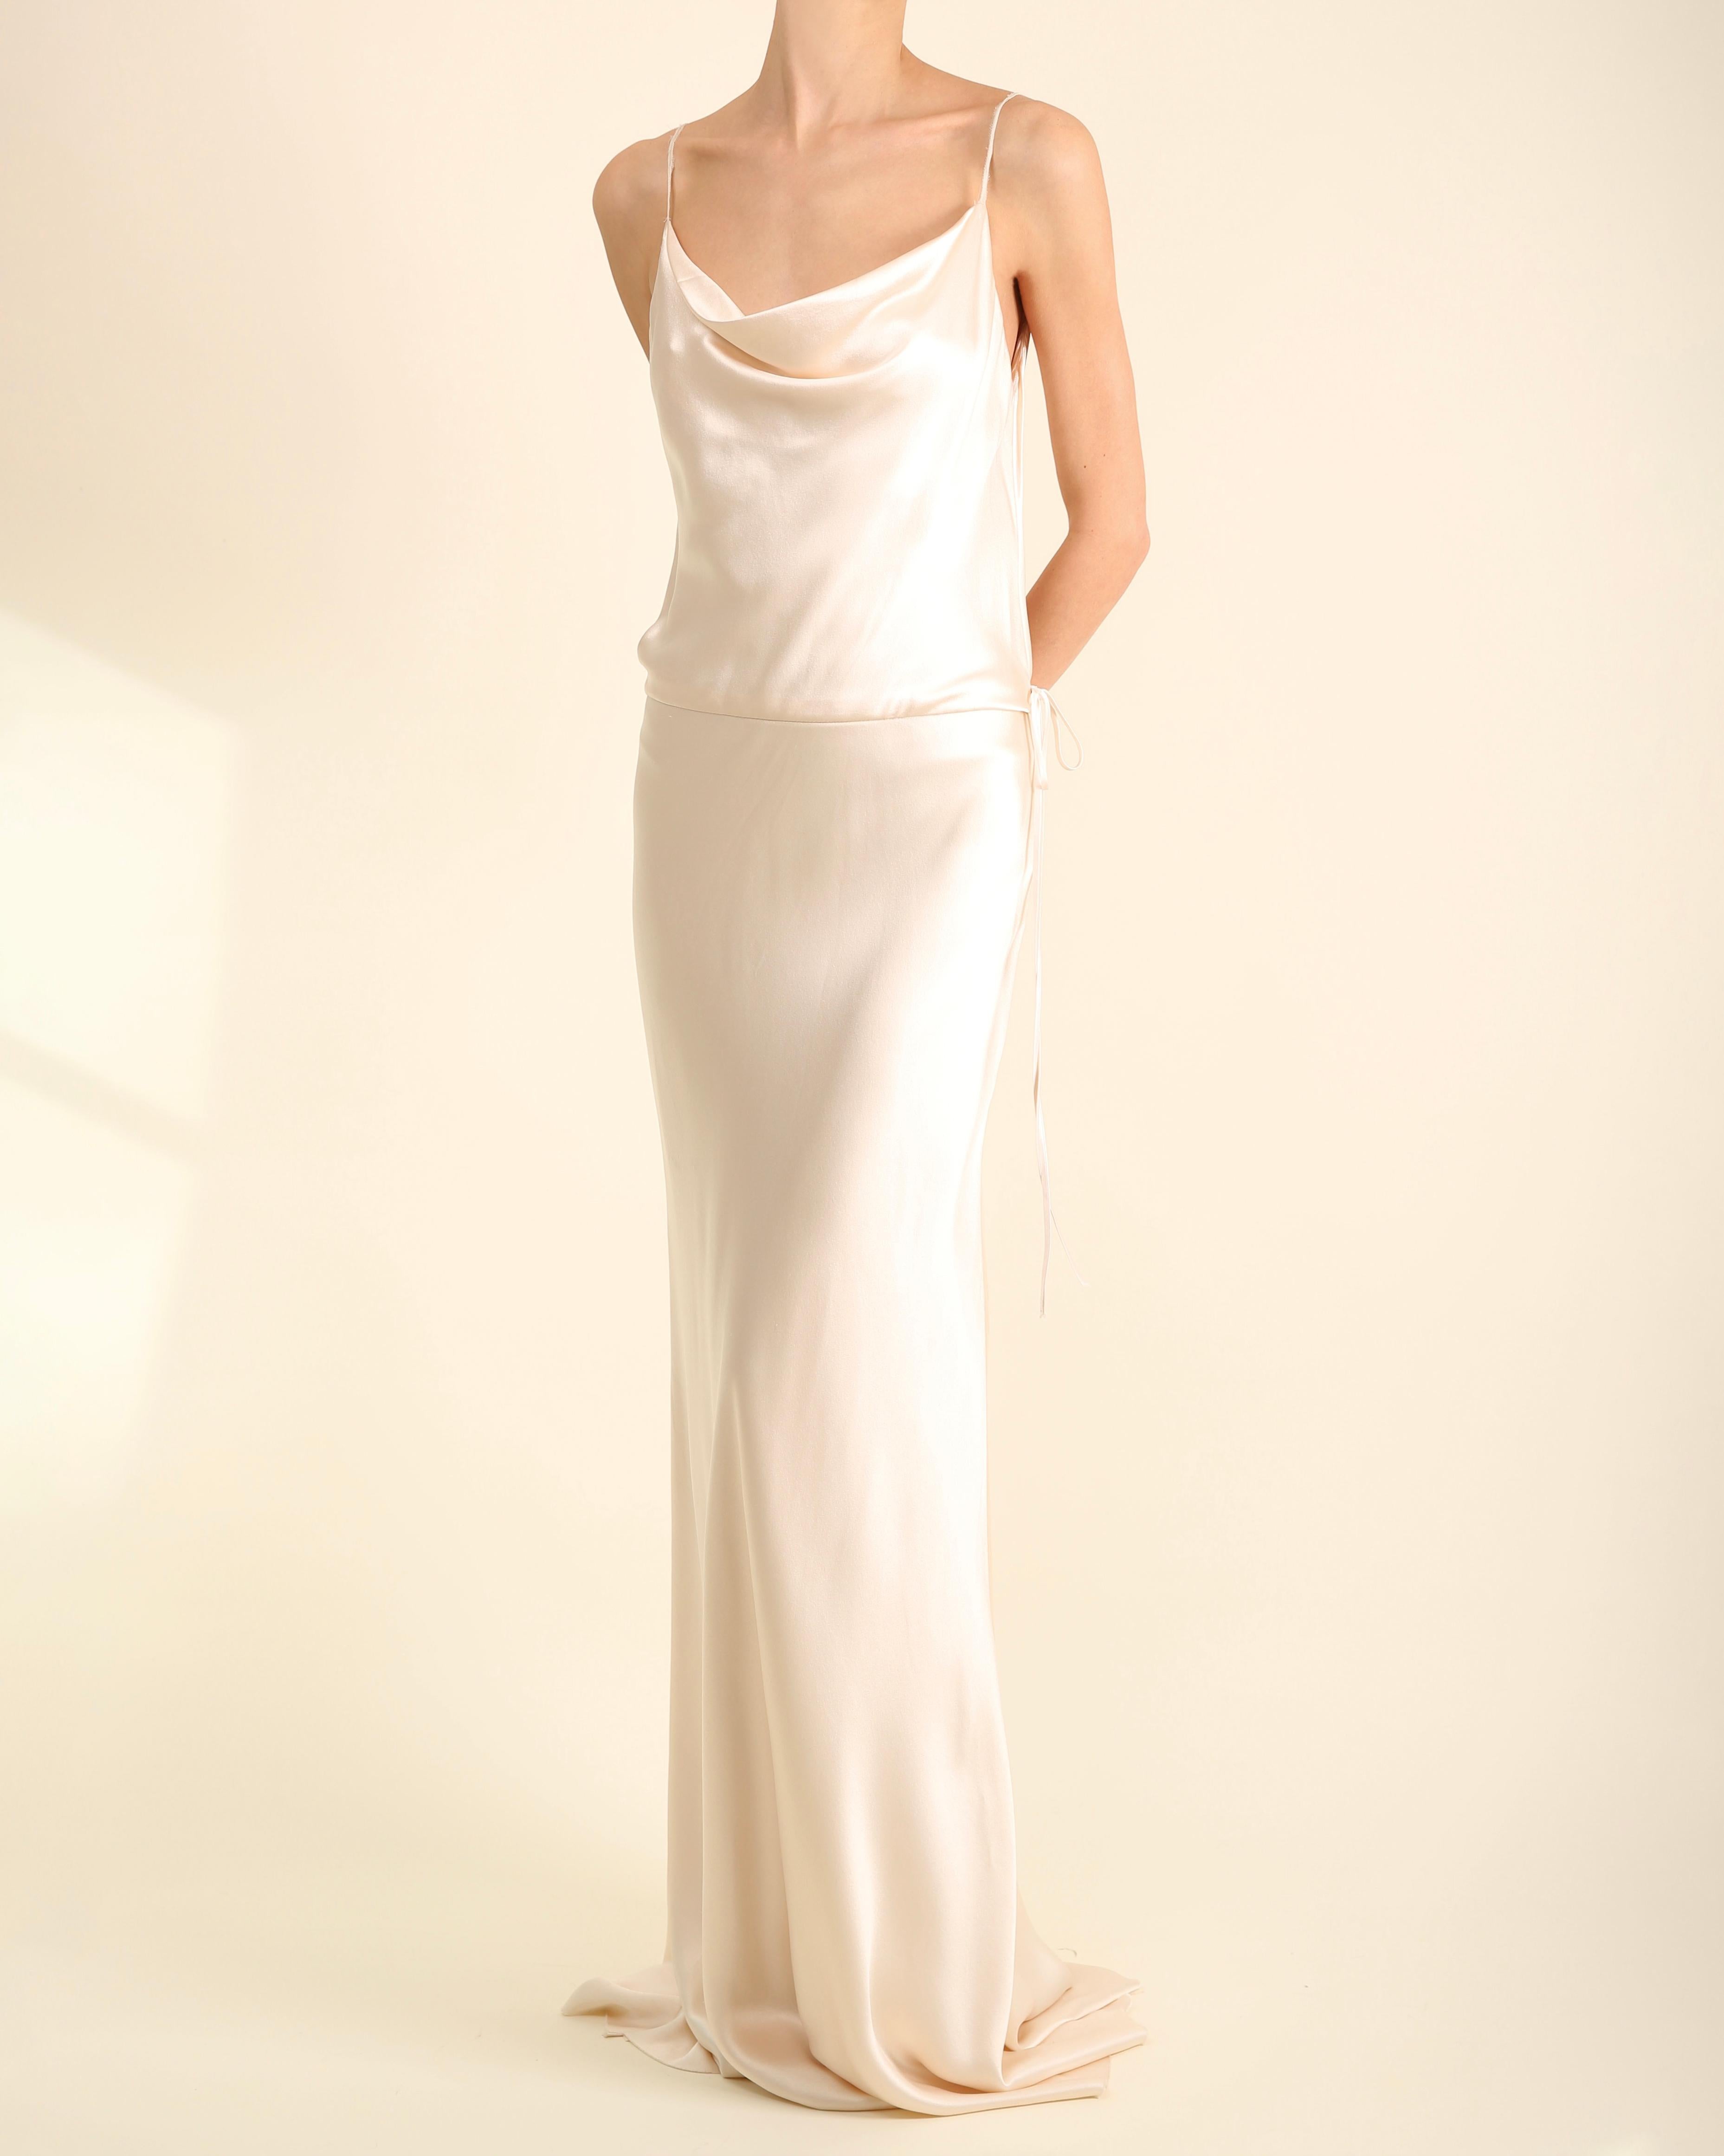 Monique L'huillier ivory silk draped wedding dress gown with low back and train For Sale 8